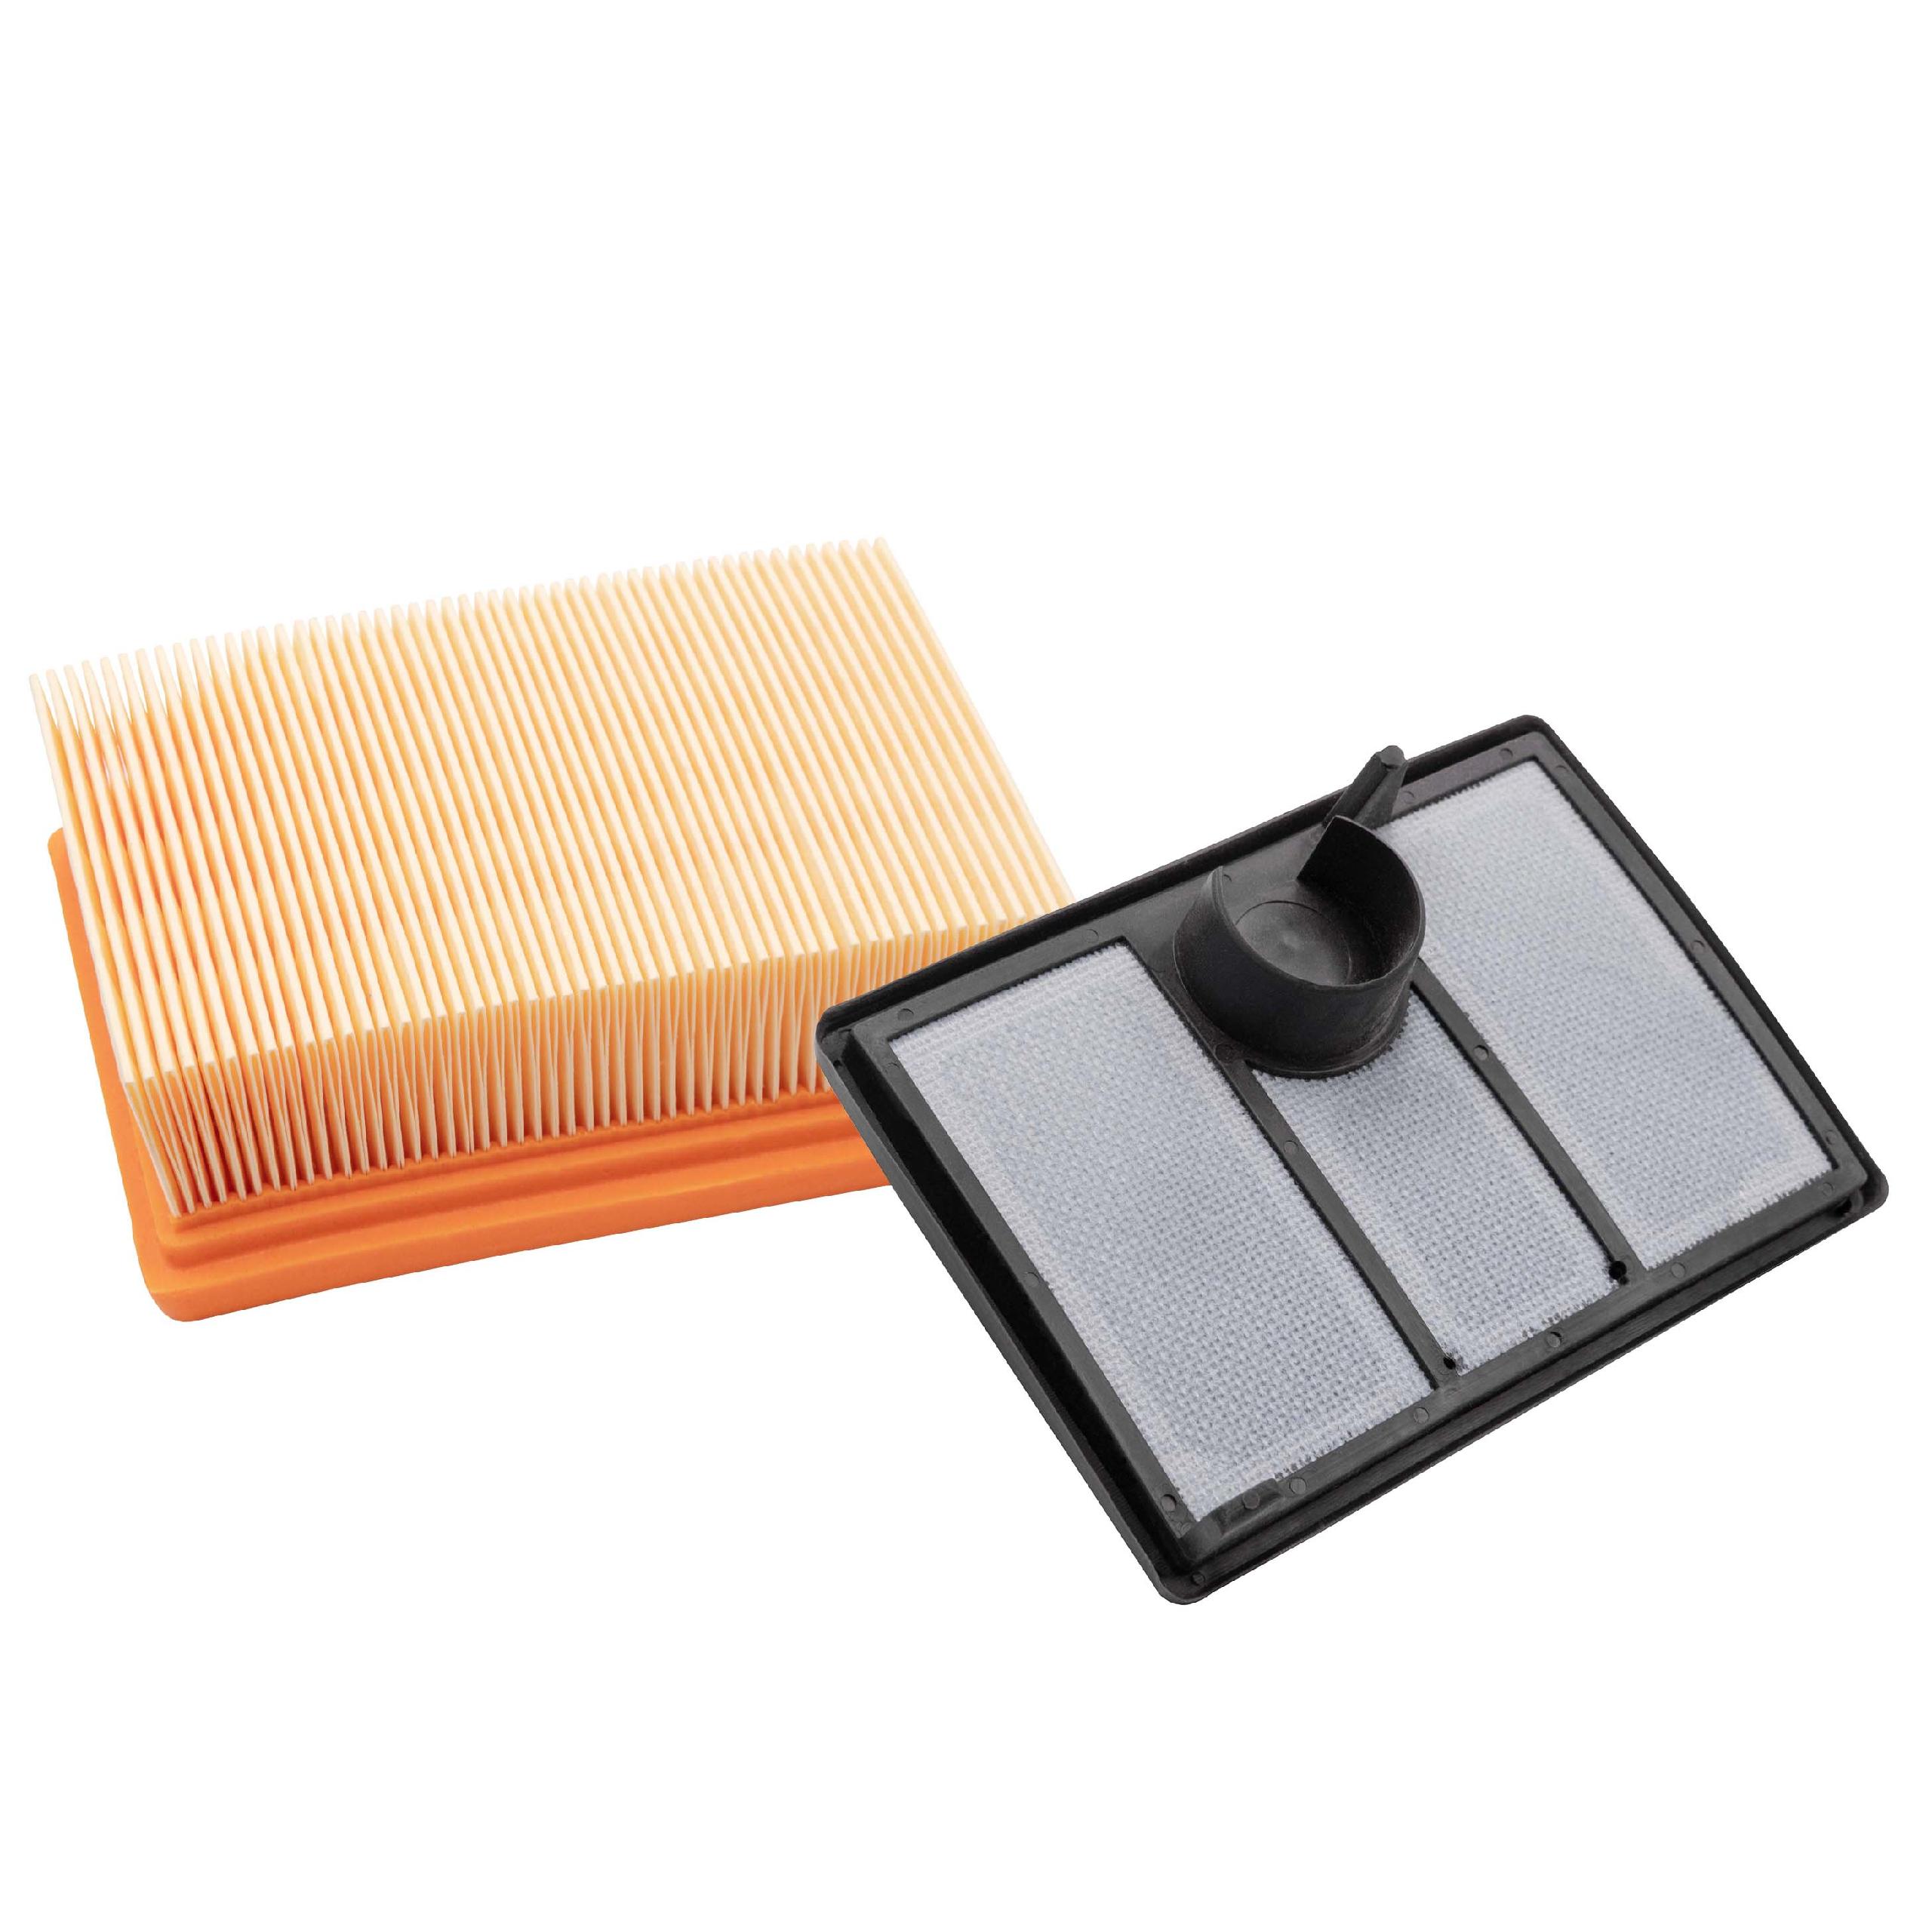 Filter Set replaces Stihl 4224 140 1801, 42241401801 for Power Saw - air filter, auxiliary filter